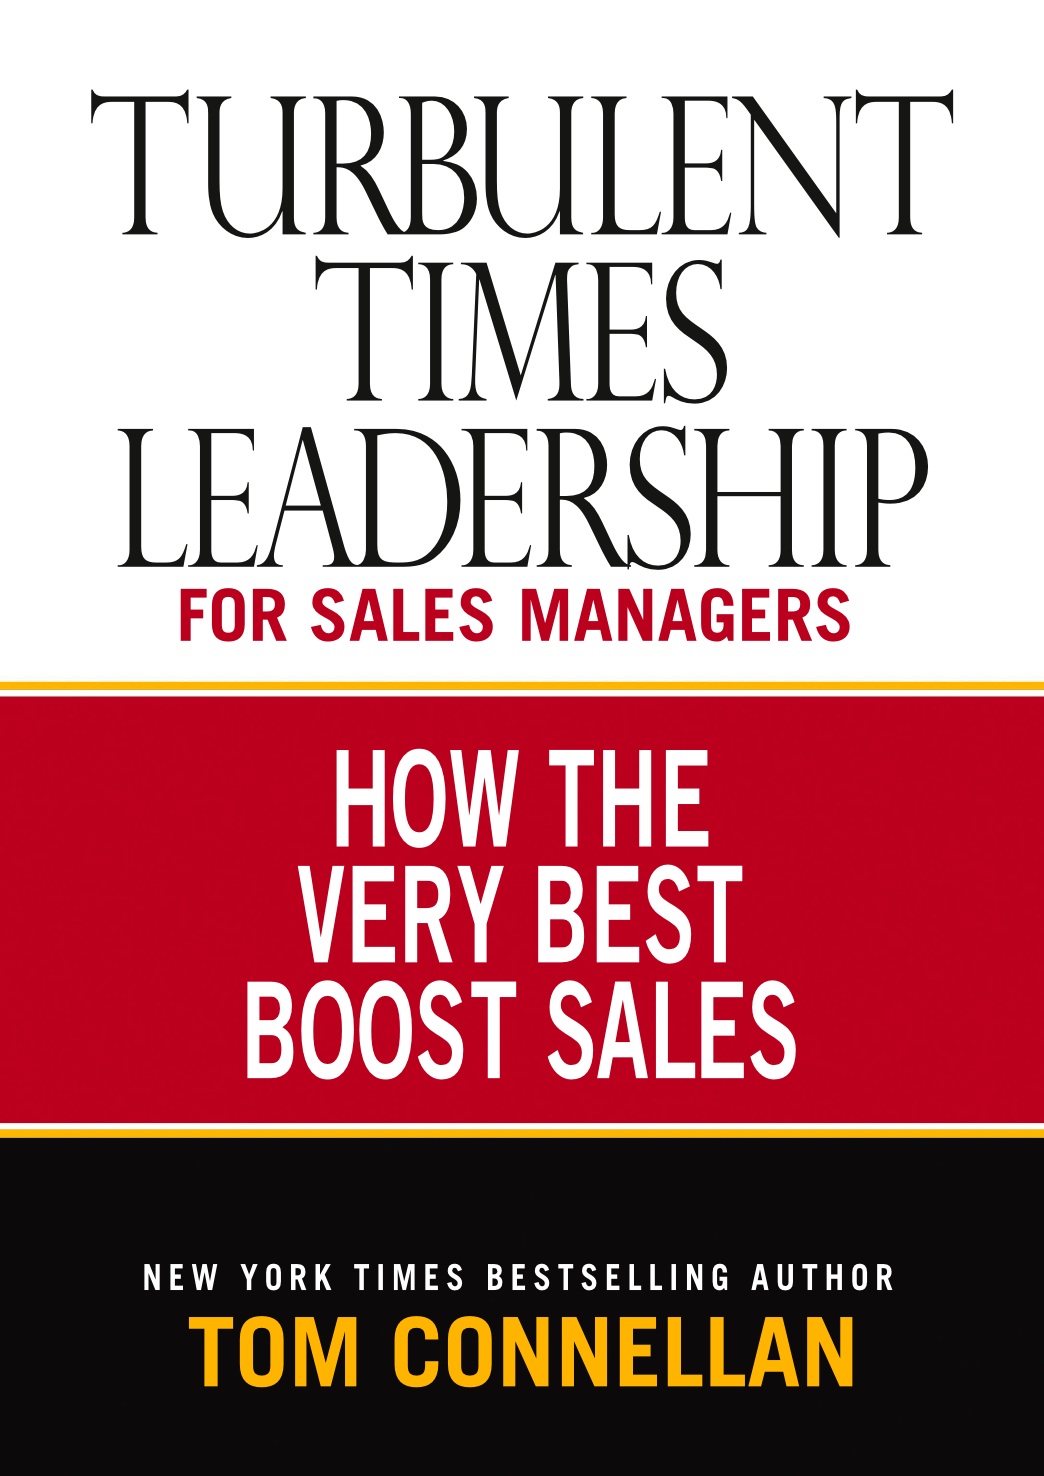 Turbulent Times Leadership for Sales Managers